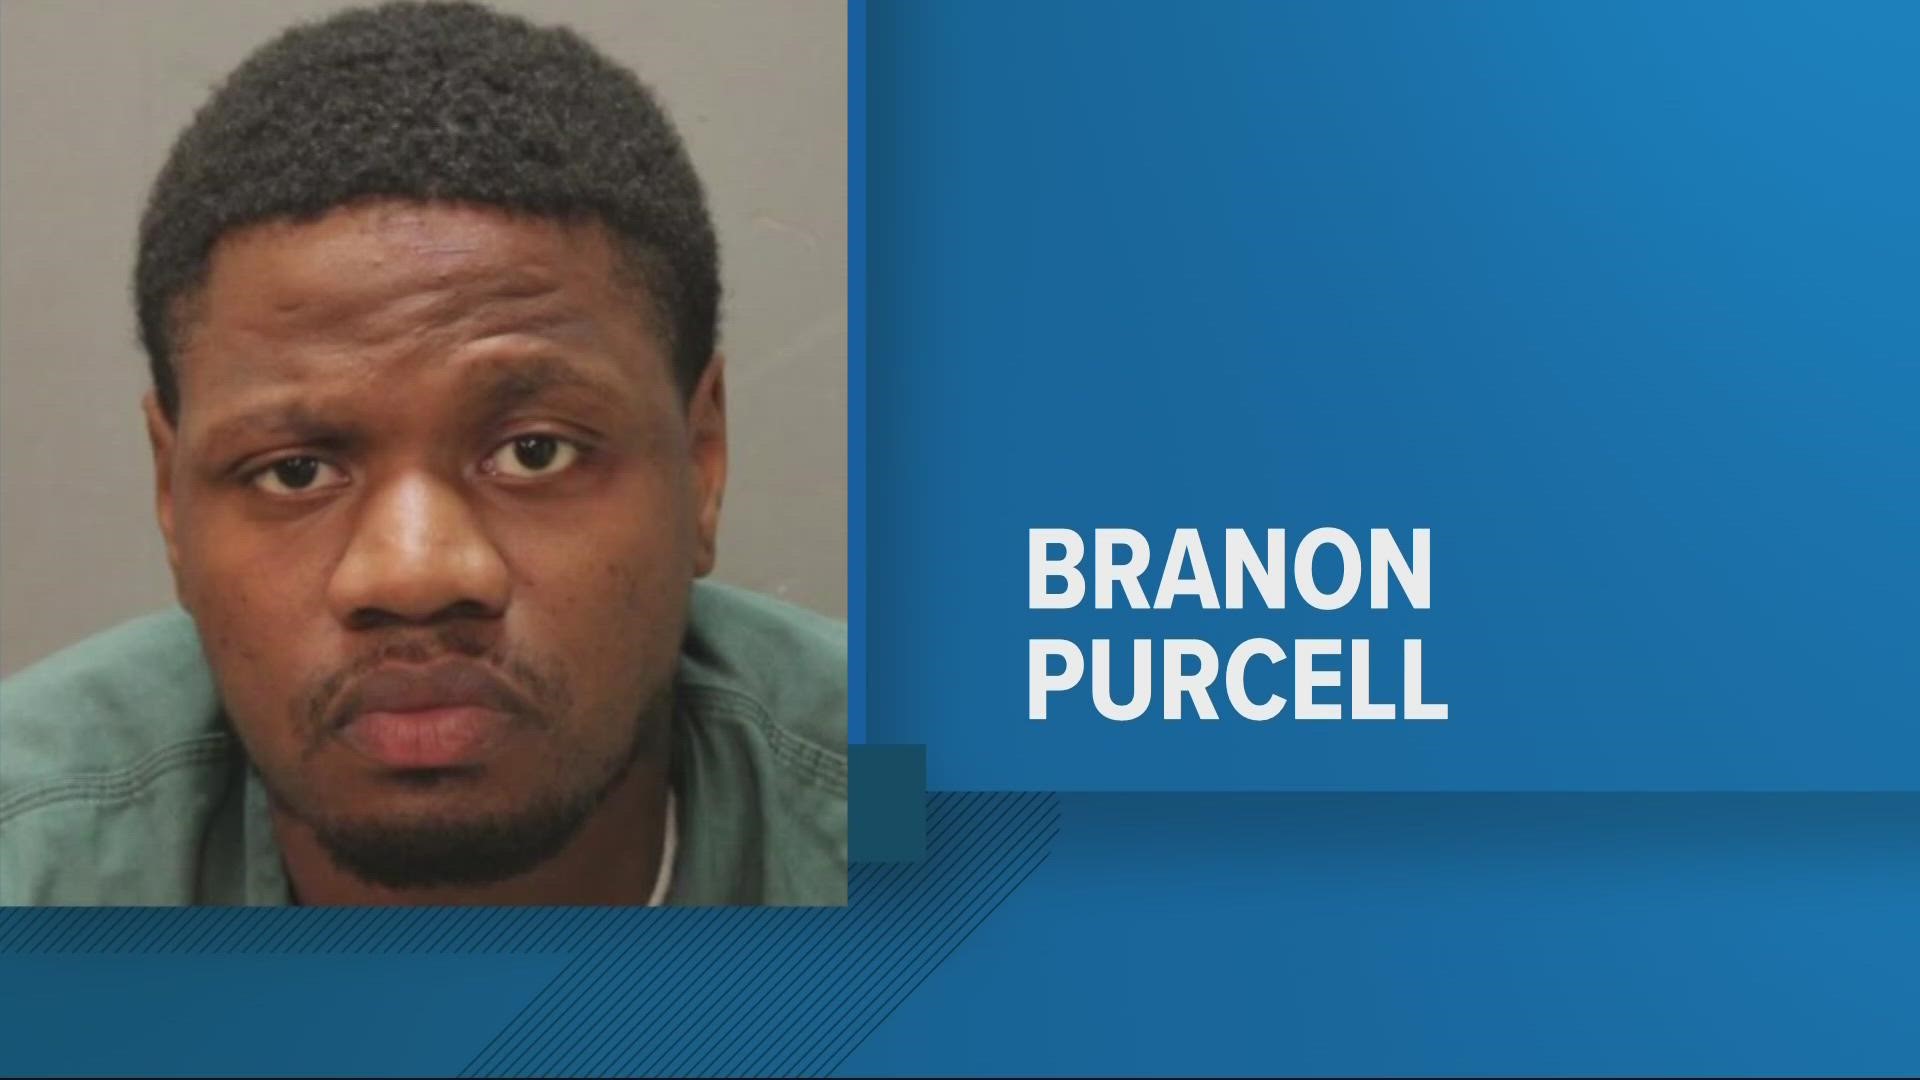 Branon Purcell was out of jail for 21 days when he committed 10 robberies, police said.